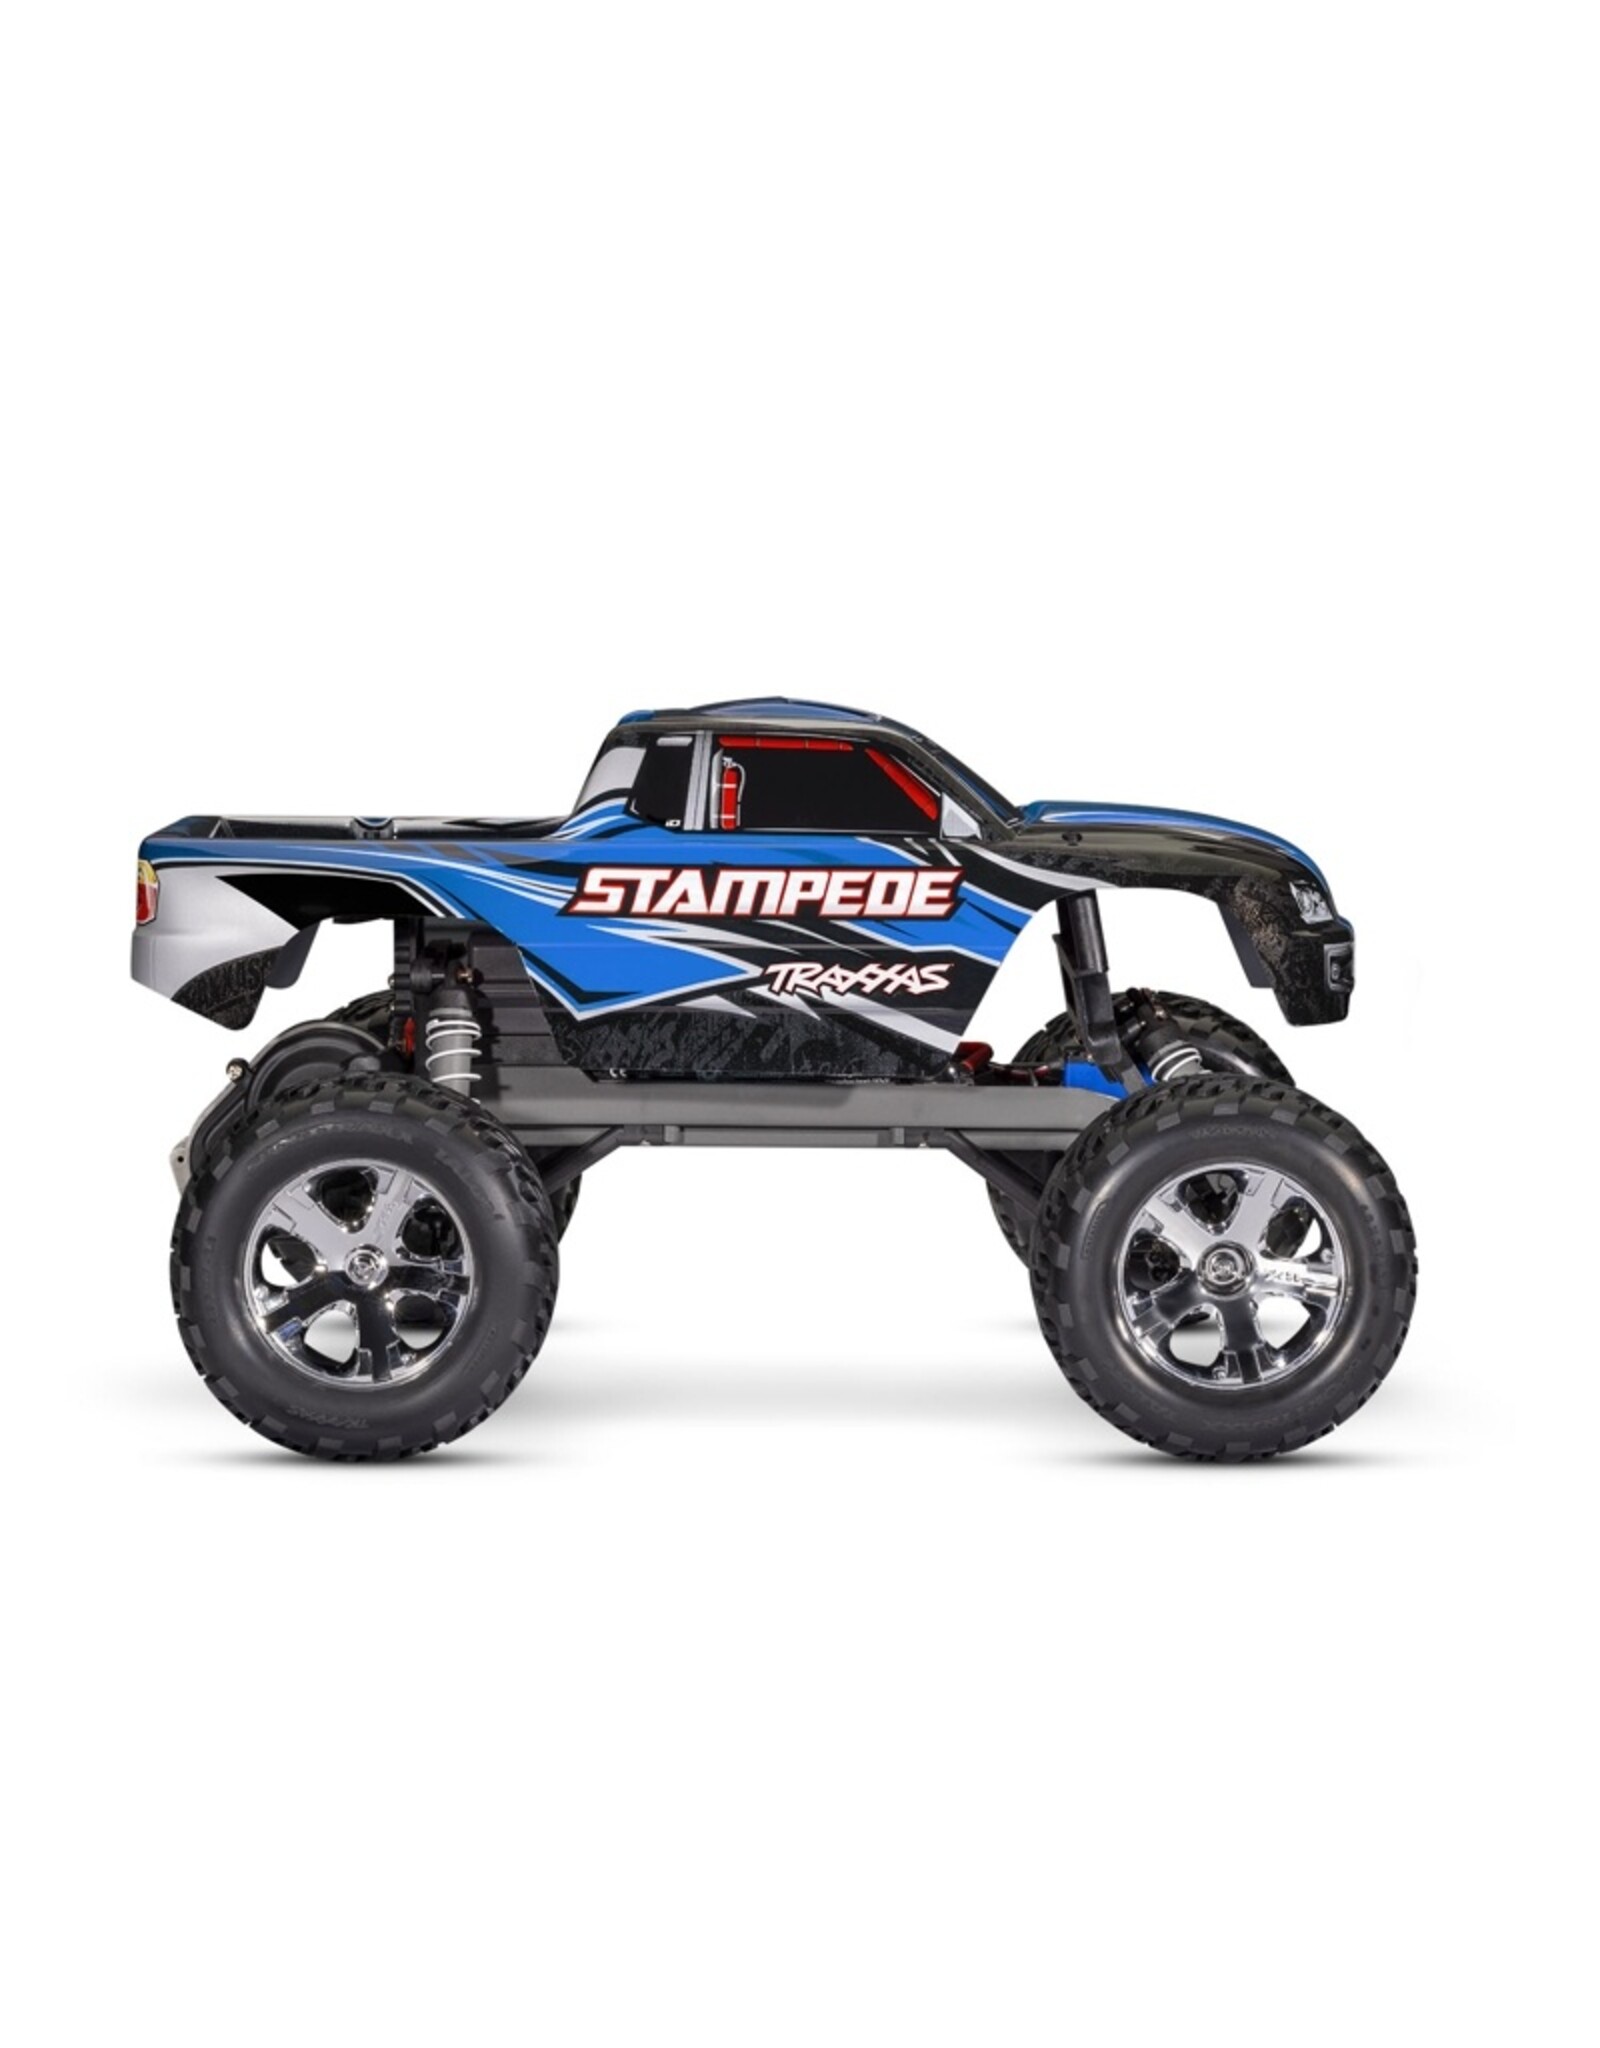 Traxxas TRA36054-8  Stampede: 1/10 Scale Monster Truck w/USB-C BLUE